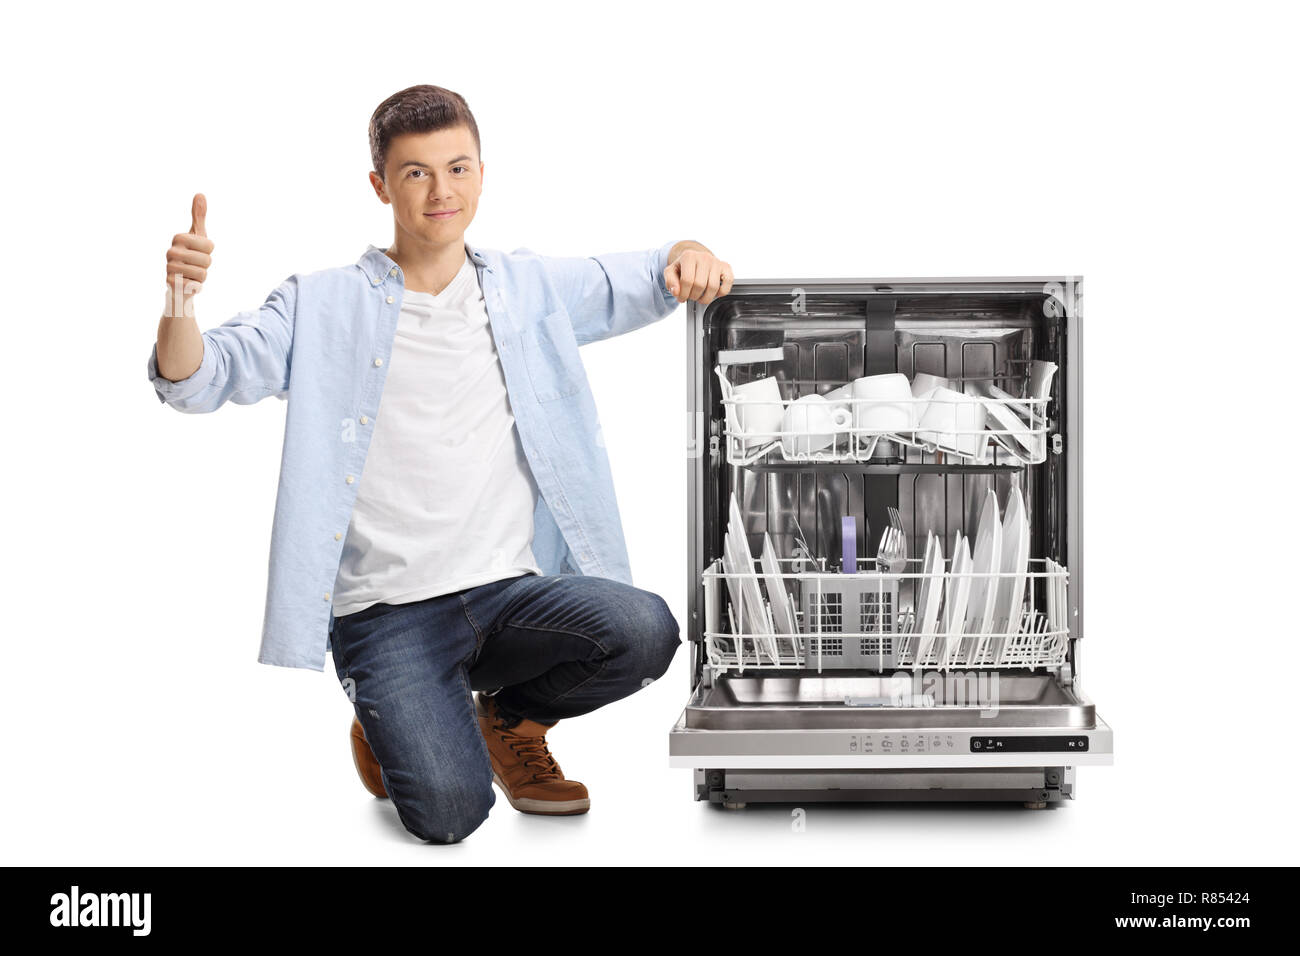 Young guy kneeling next to a loaded dishwasher with thumb up isolated on white background Stock Photo